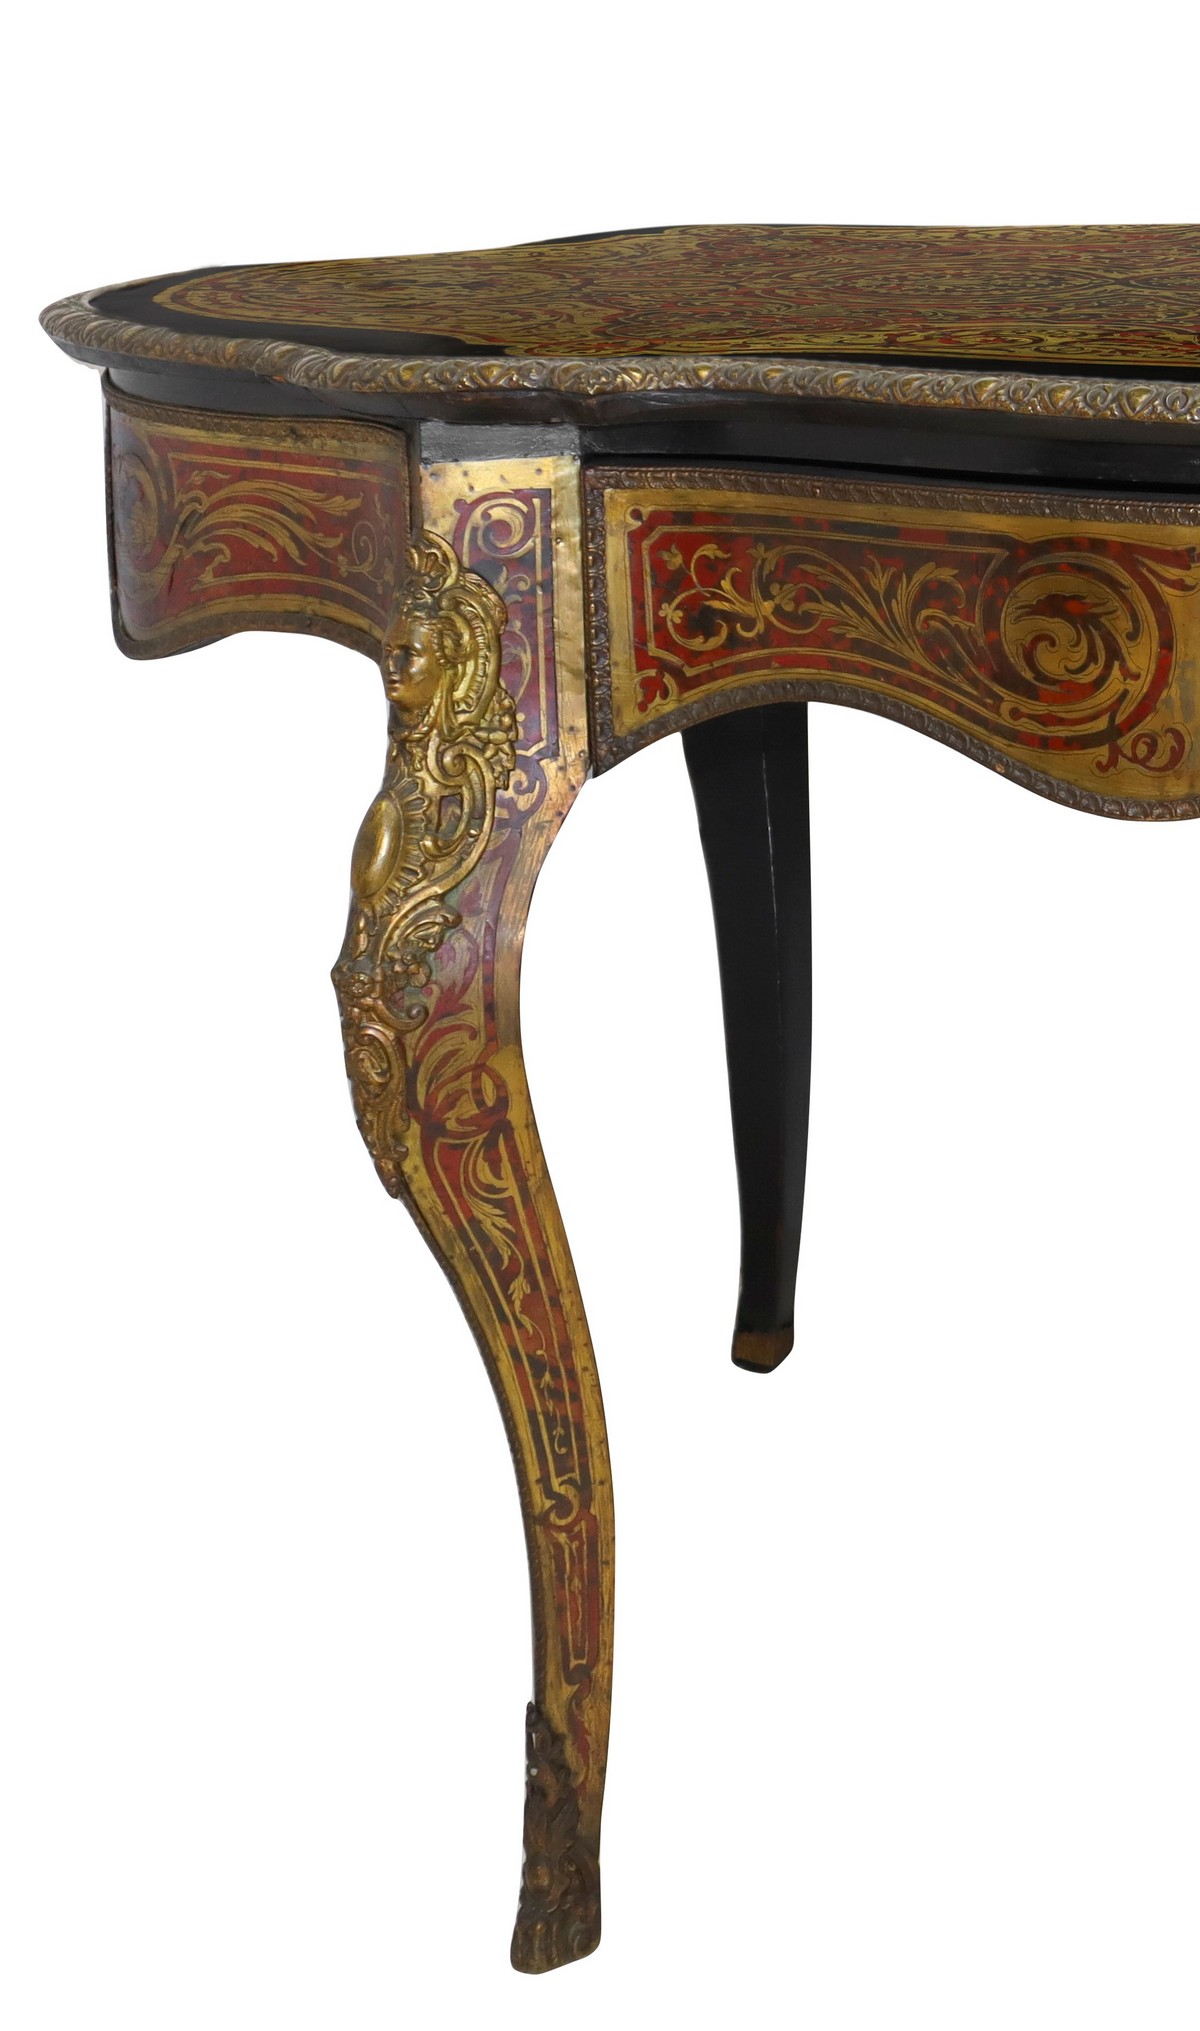 Boulle table, Late 19th century - Image 3 of 4